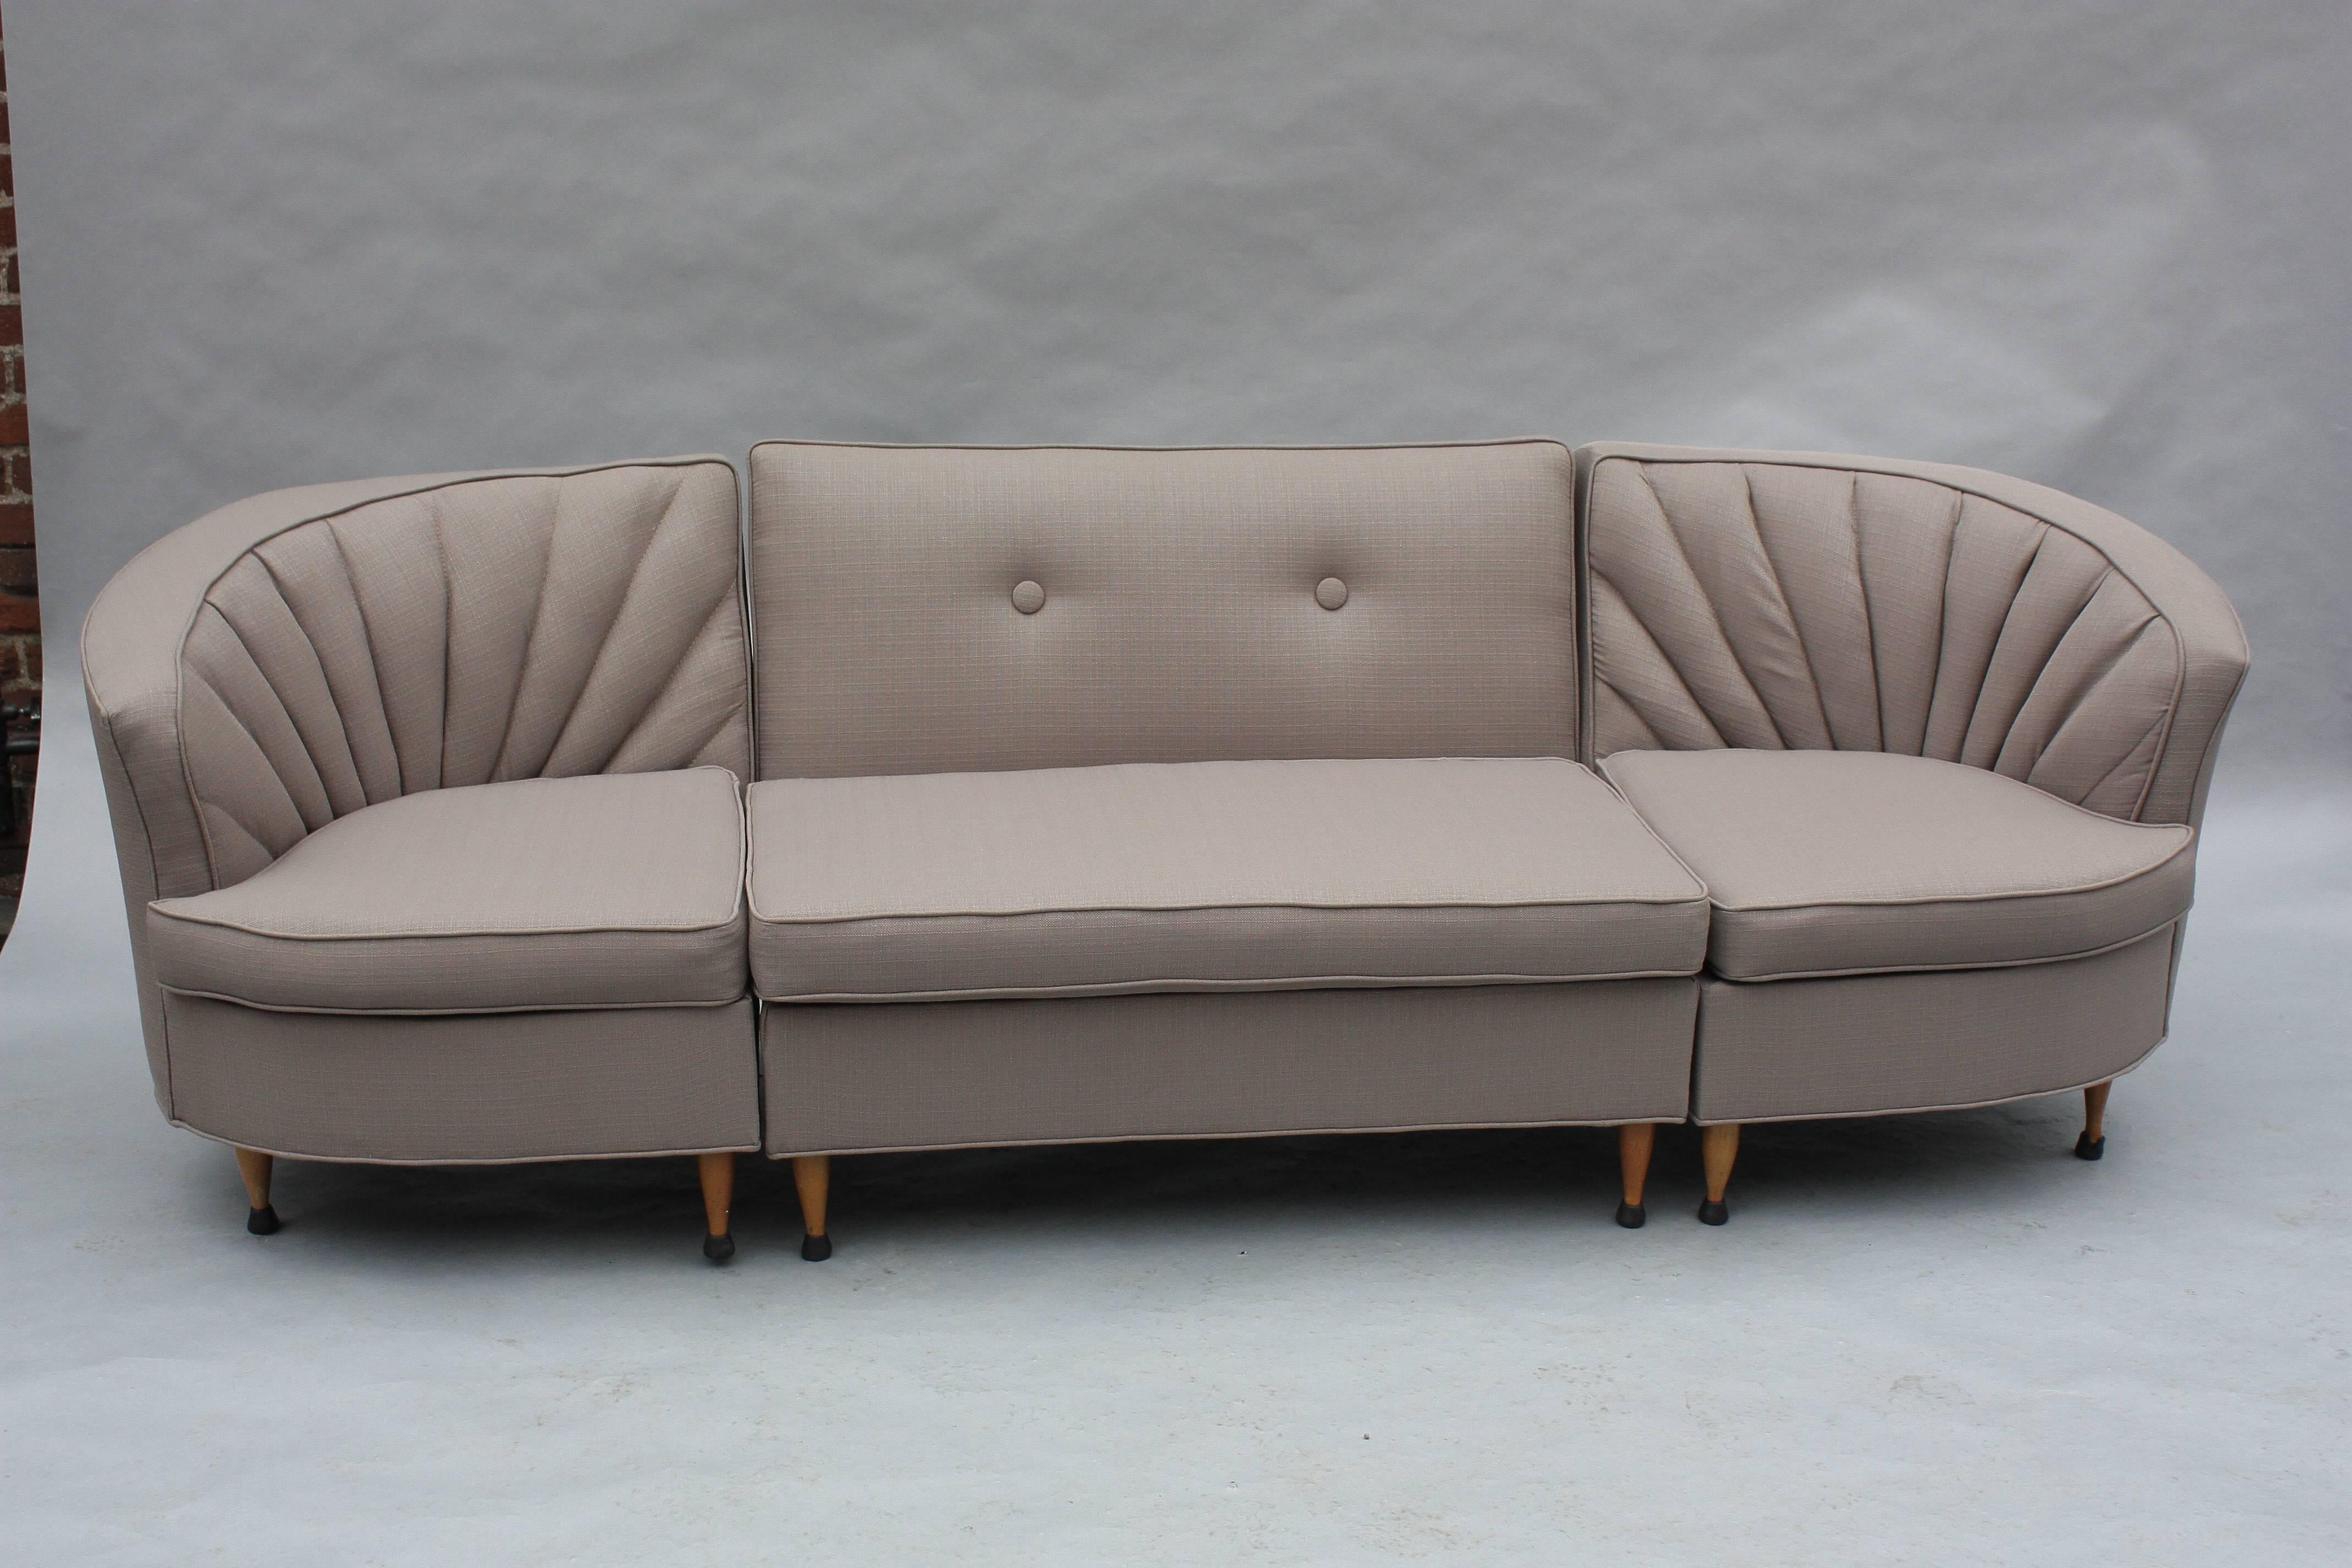 North American Mid-Century Modern 1960s Sectional Sofa